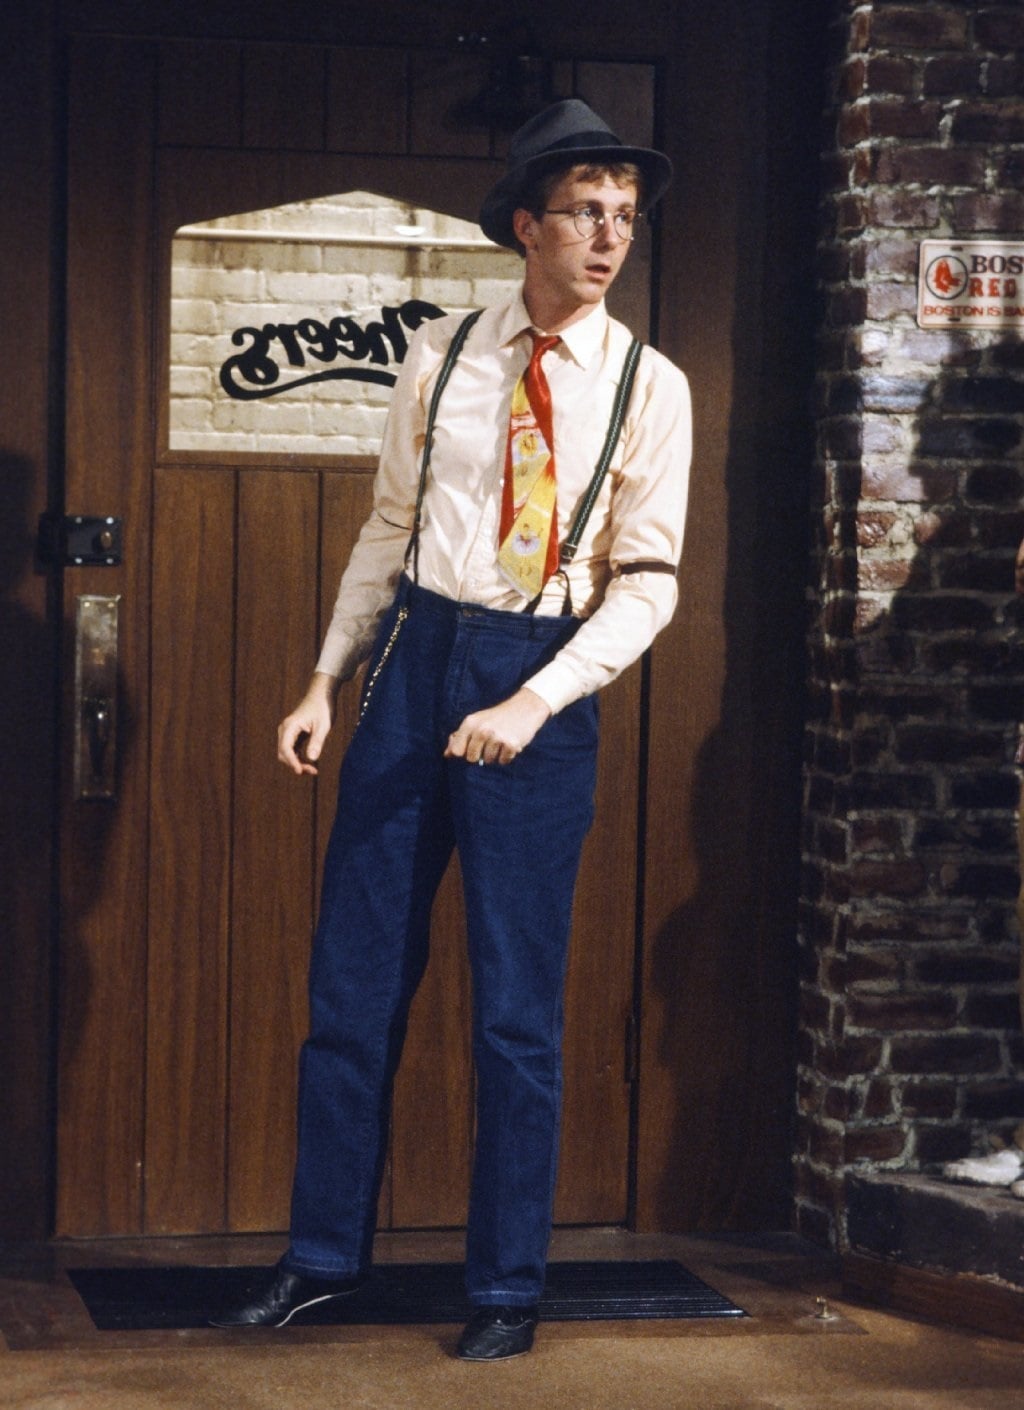 Harry Gittes is a recurring character on Cheers played by the late Harry Anderson